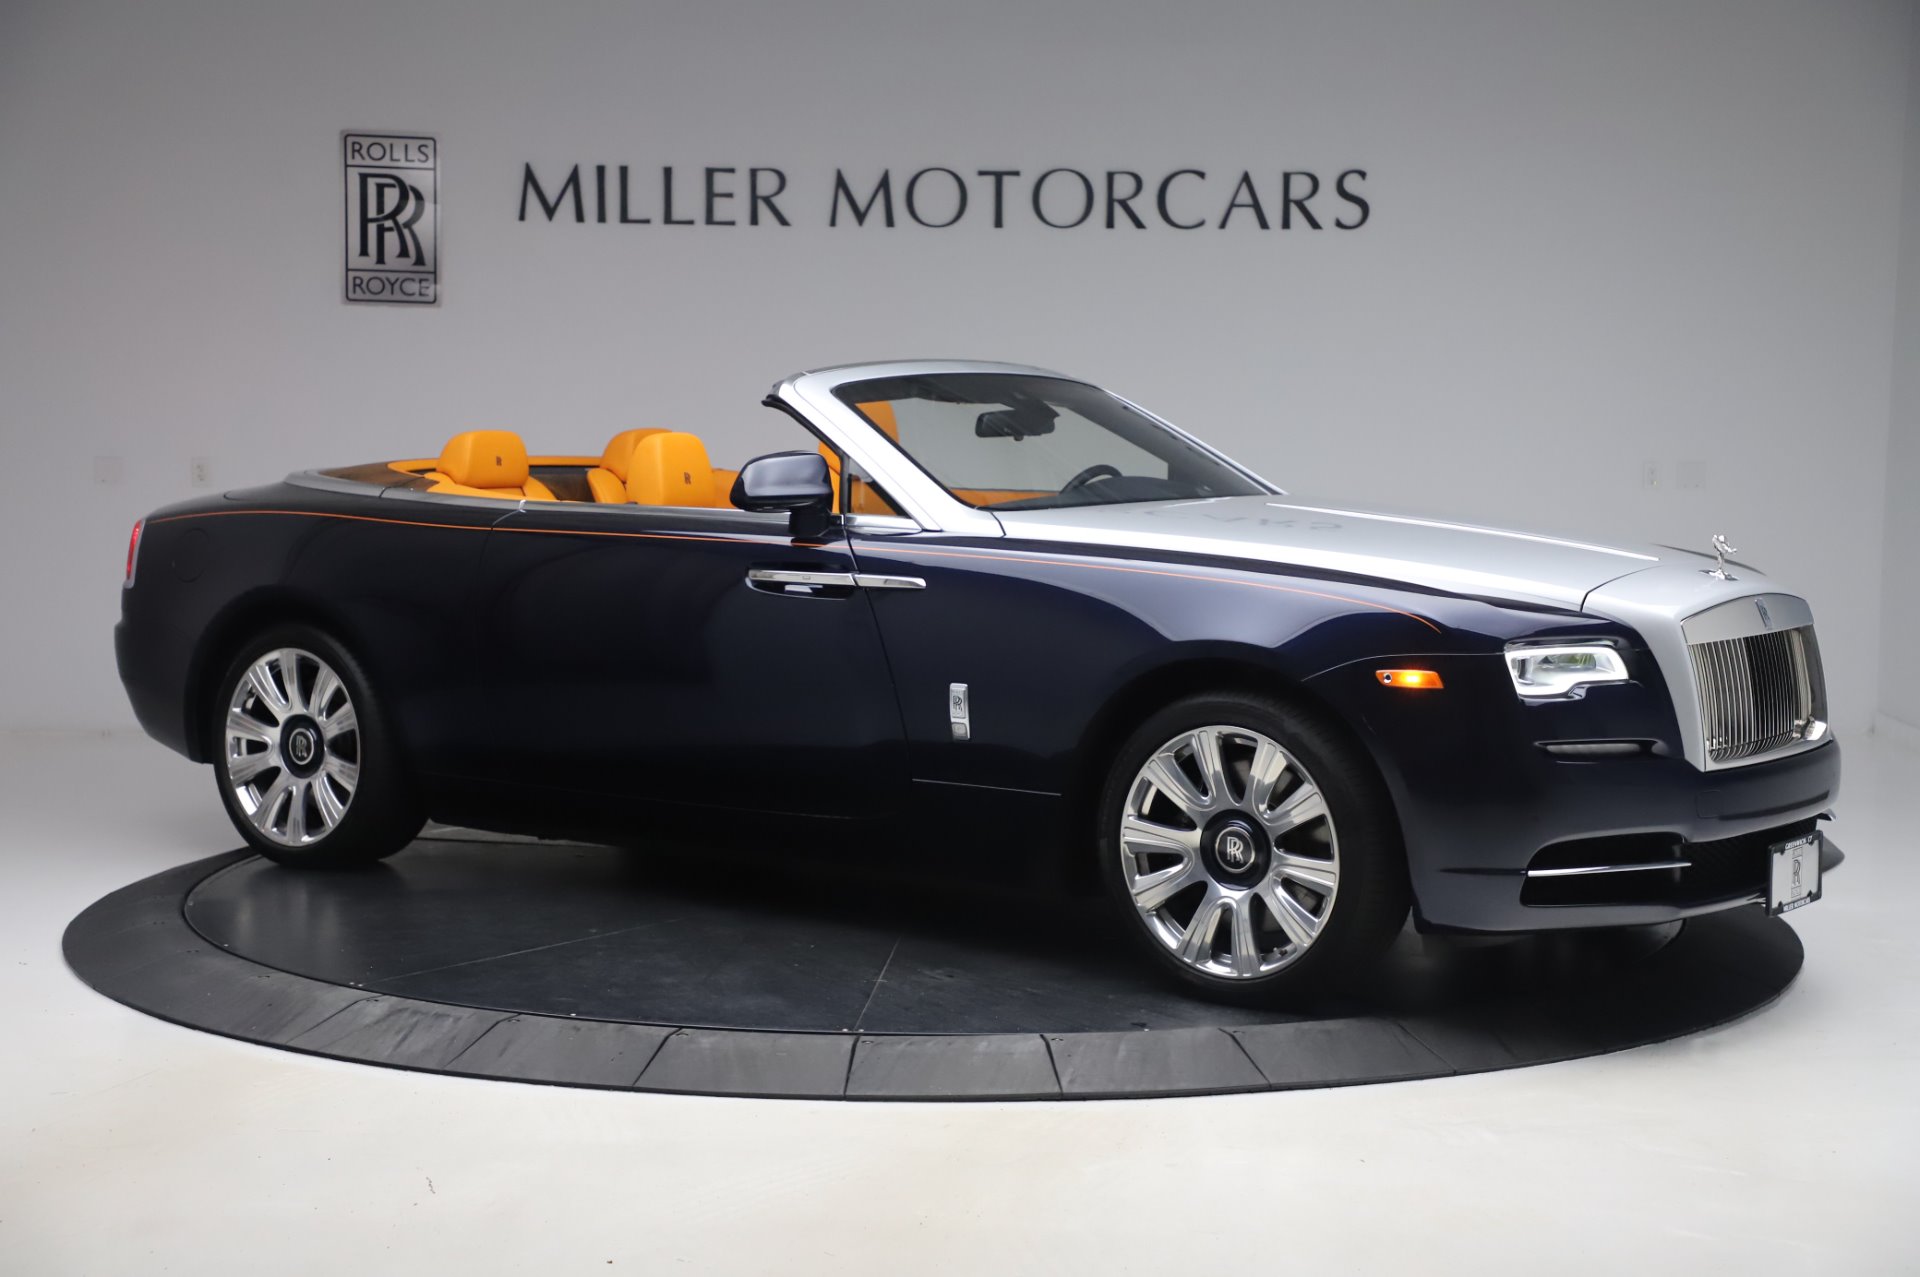 Used 2017 RollsRoyce Dawn For Sale Sold  iLusso Stock 102981